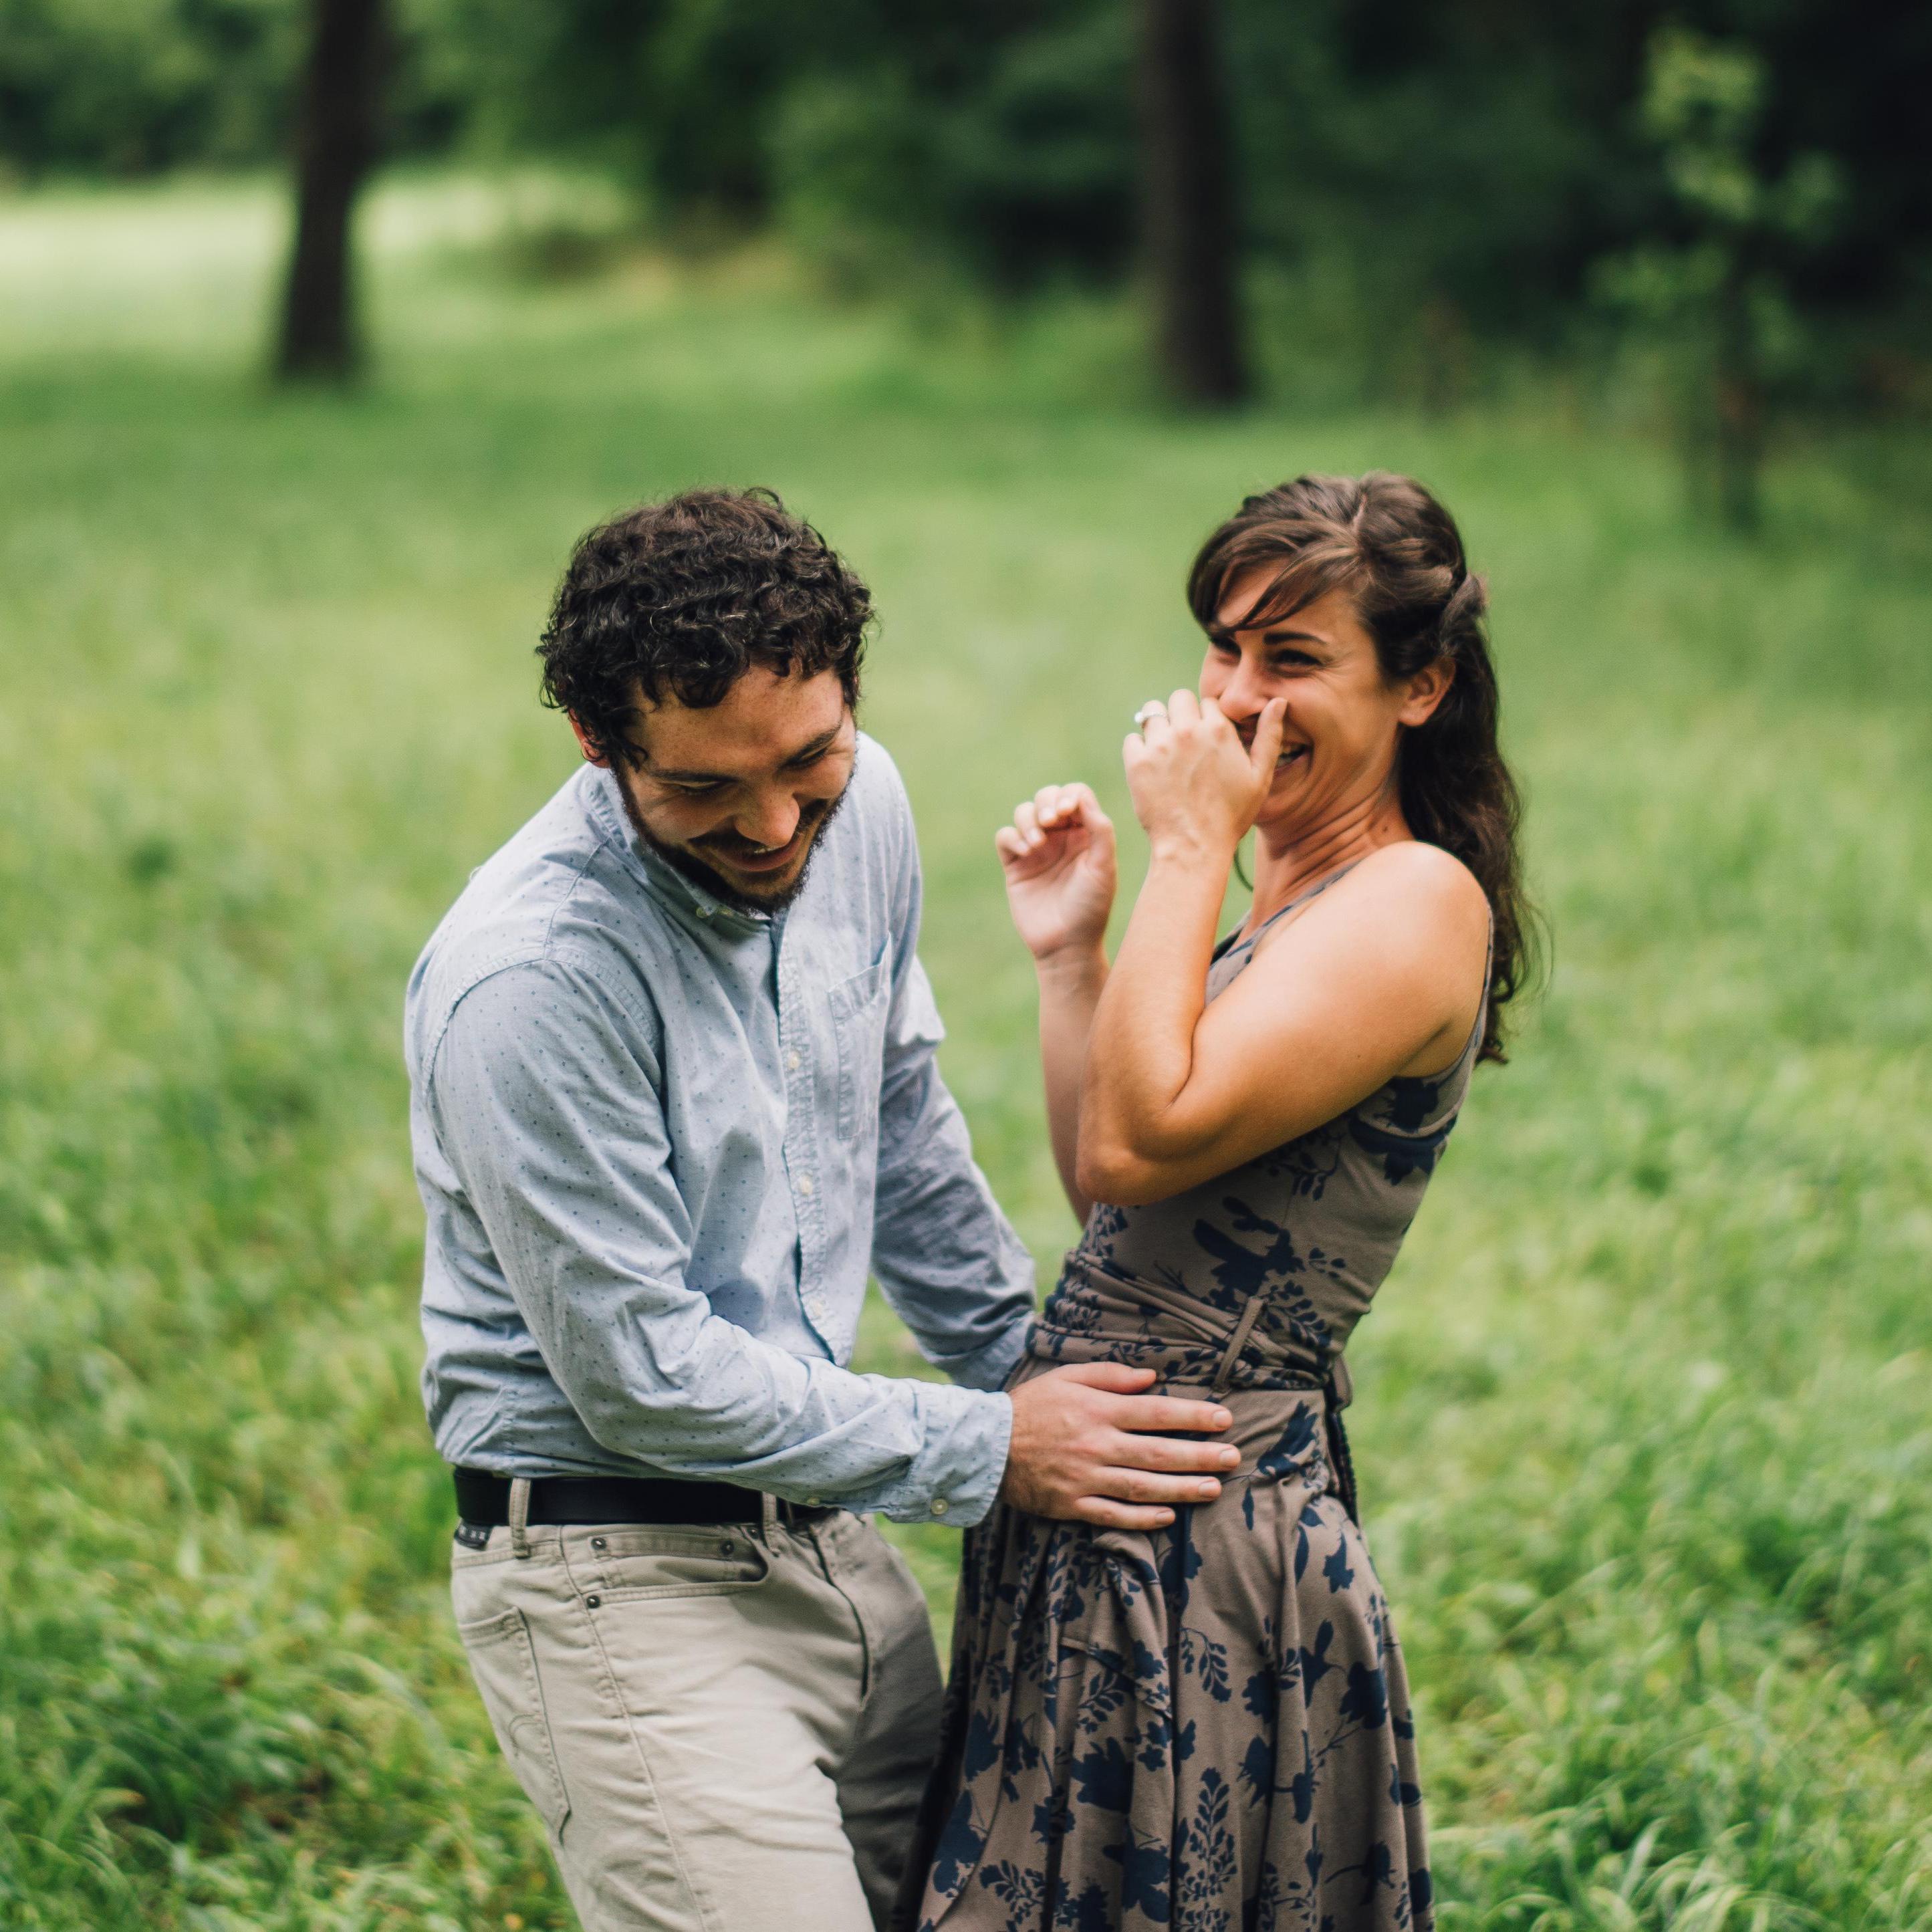 Falling in nerd love at Hunsberger Woods.

Photo credit to JD Land of Two15 Photography.